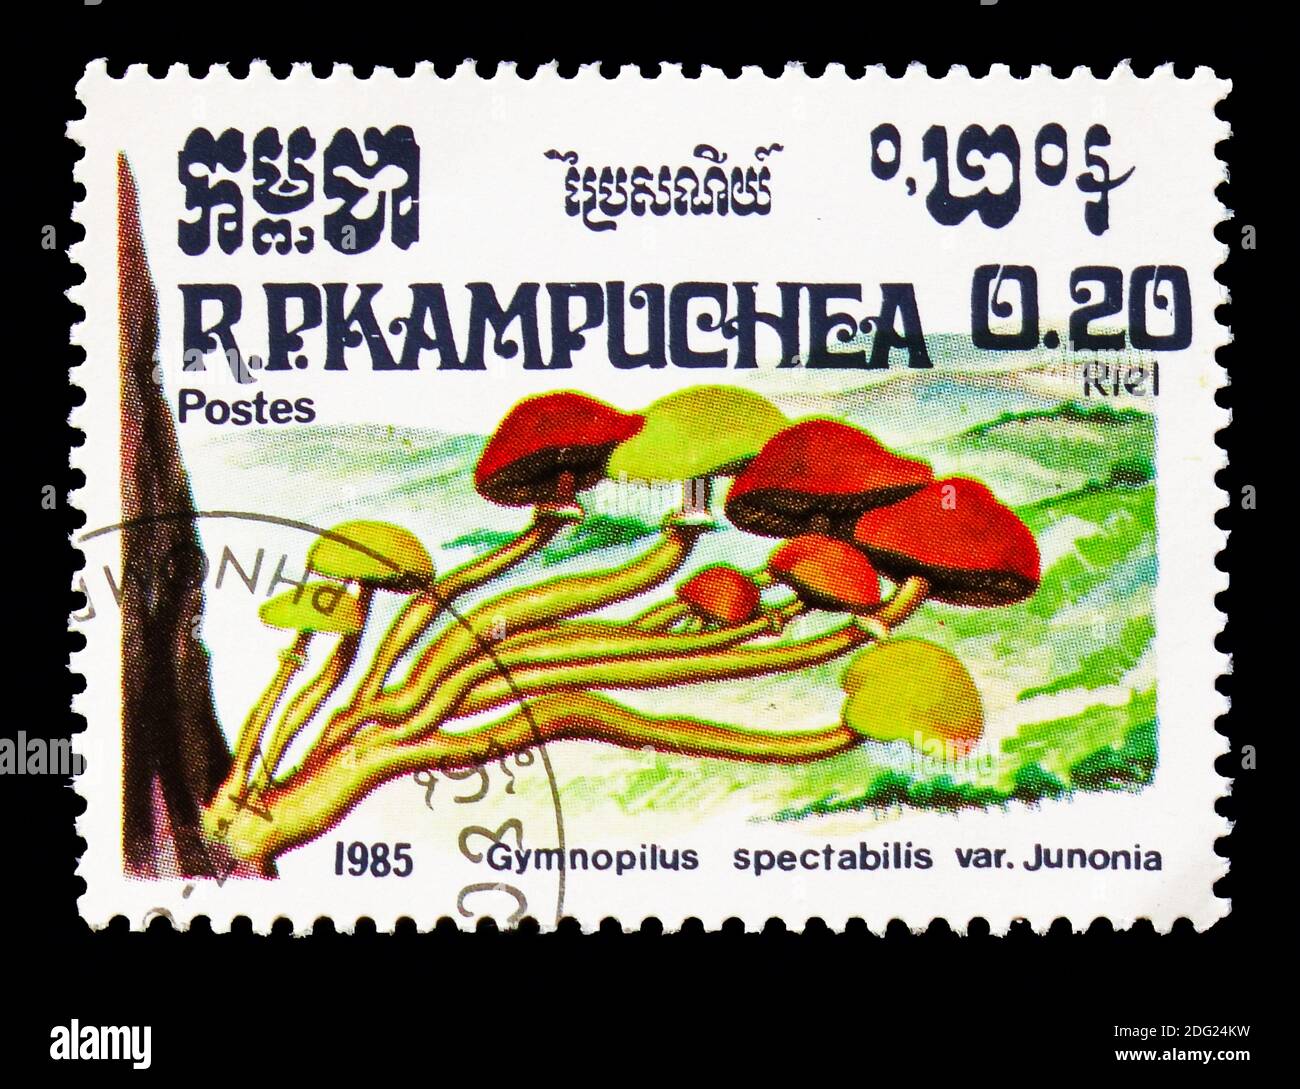 MOSCOW, RUSSIA - AUGUST 18, 2018: A stamp printed in Cambodia shows Gymnopilus spectabilis var. Junonina, Mushrooms serie, circa 1985 Stock Photo